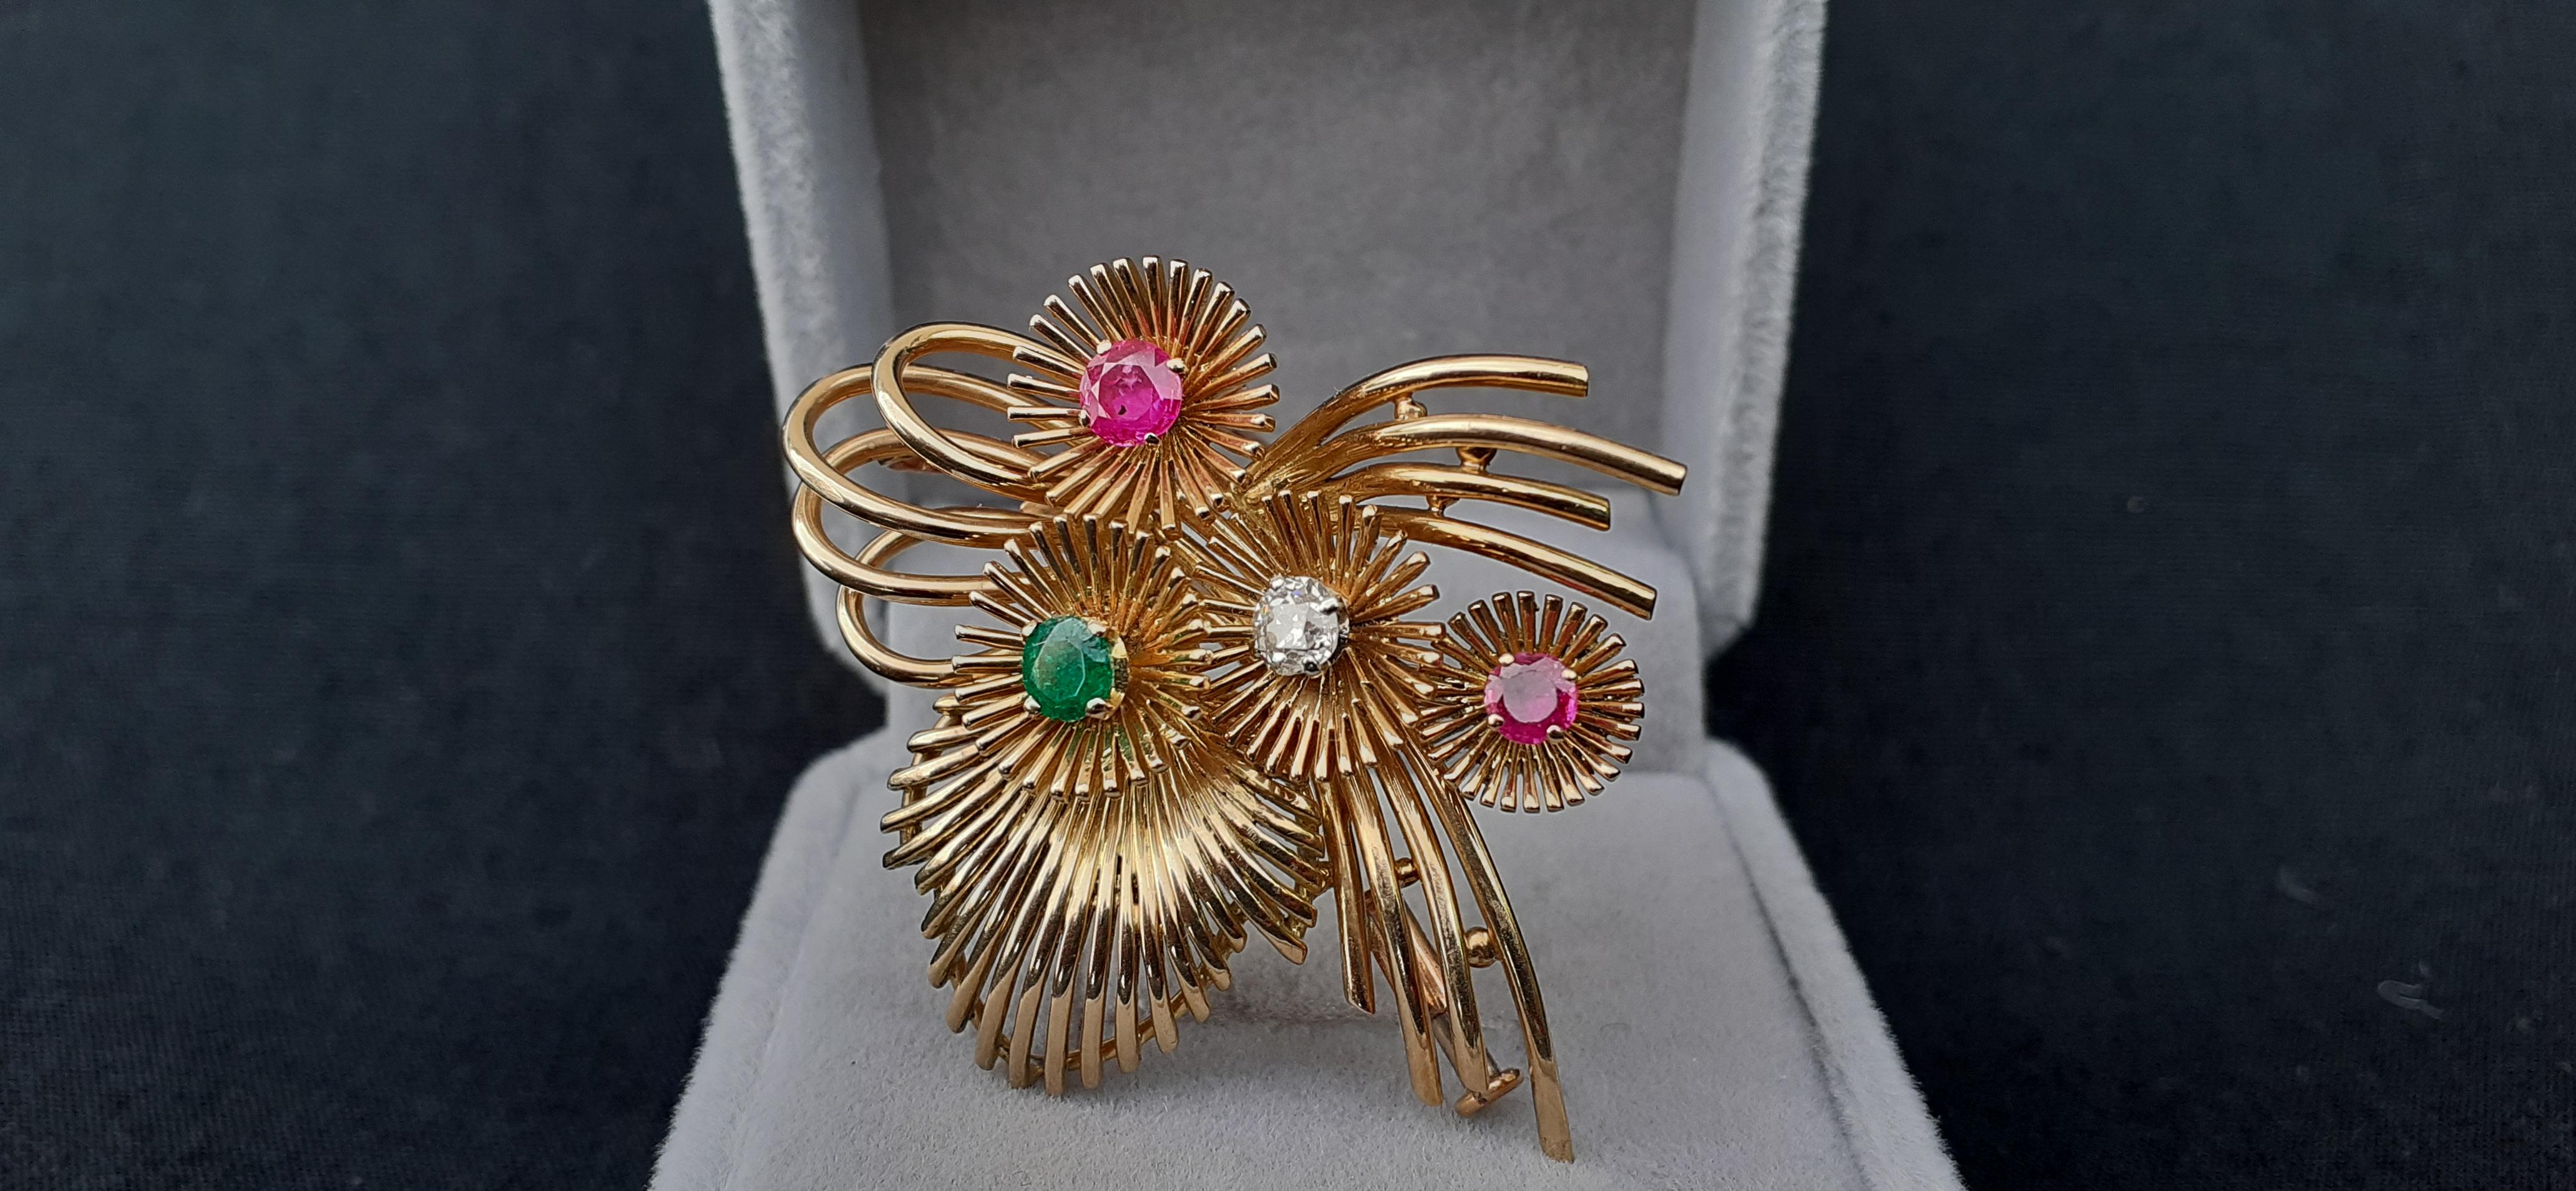 Women's Sumptuous Bouquet of Flowers Lapel Pin Brooch in Gold and Gems For Sale